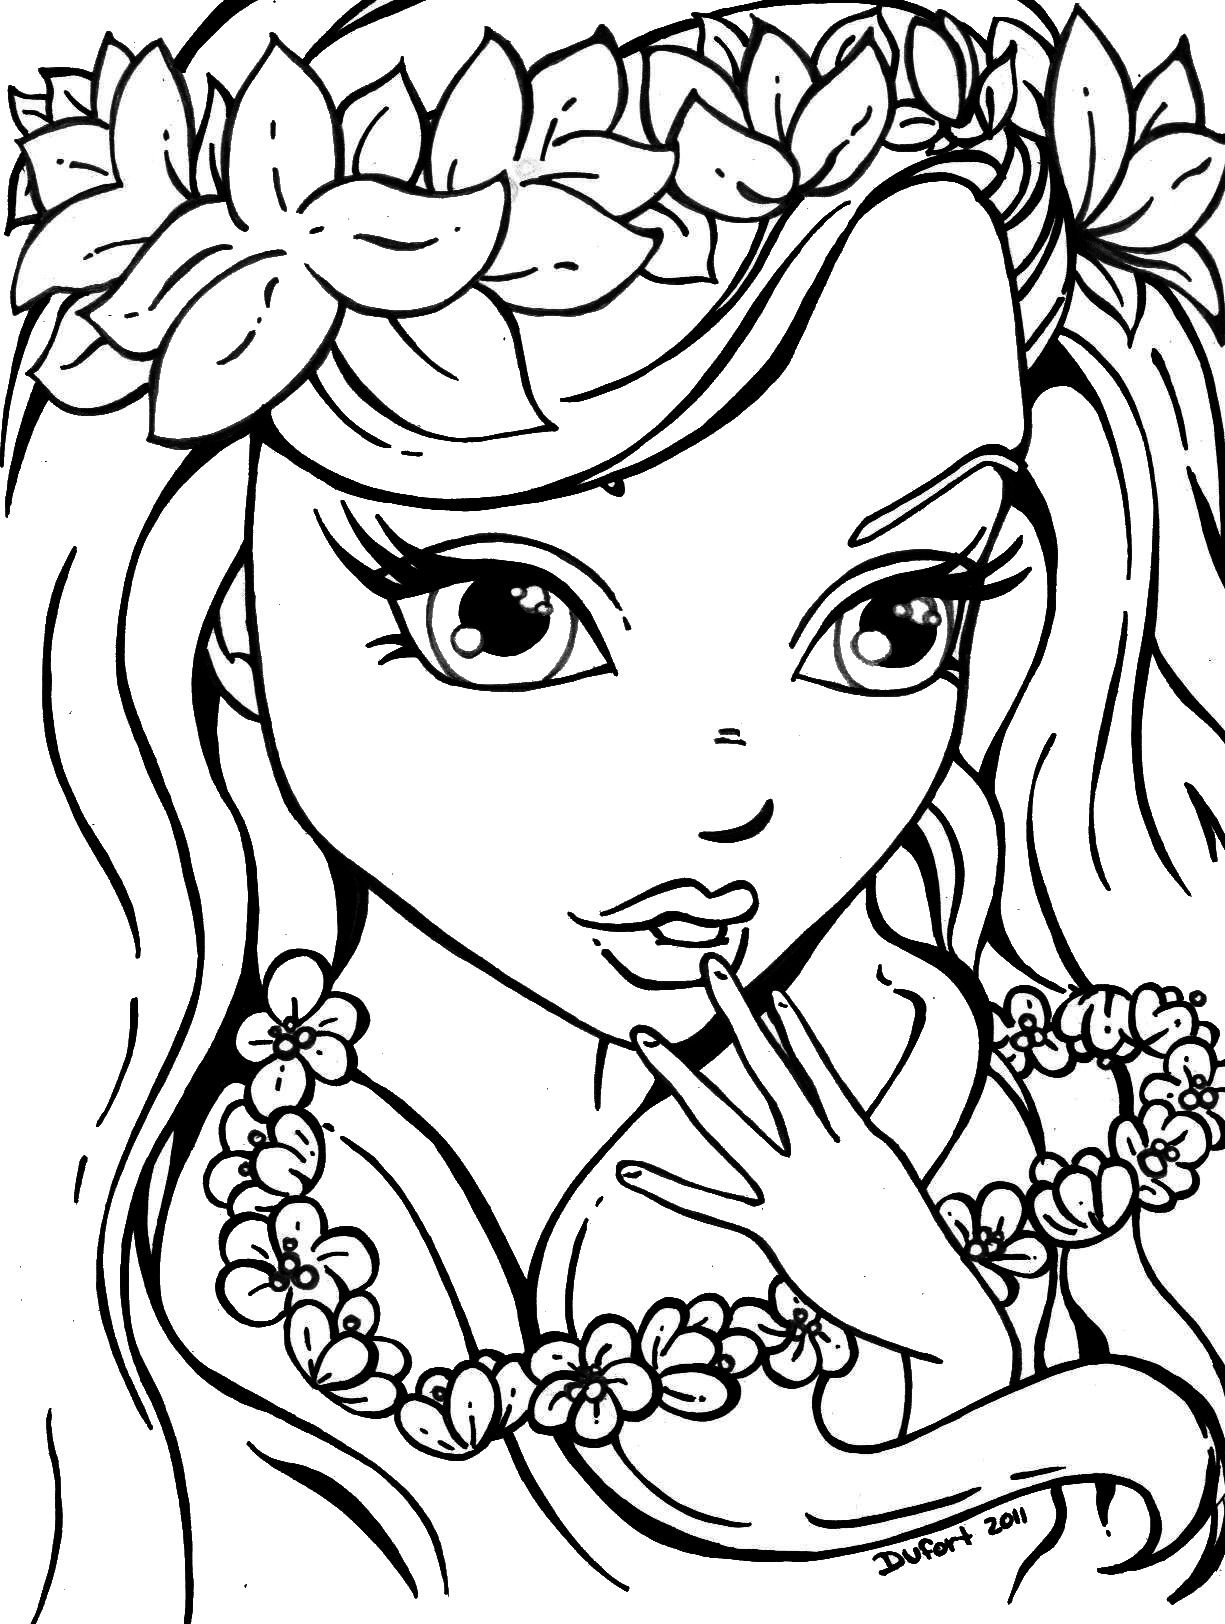 1000 Coloring Pages For Girls
 1000 images about patterns on Pinterest